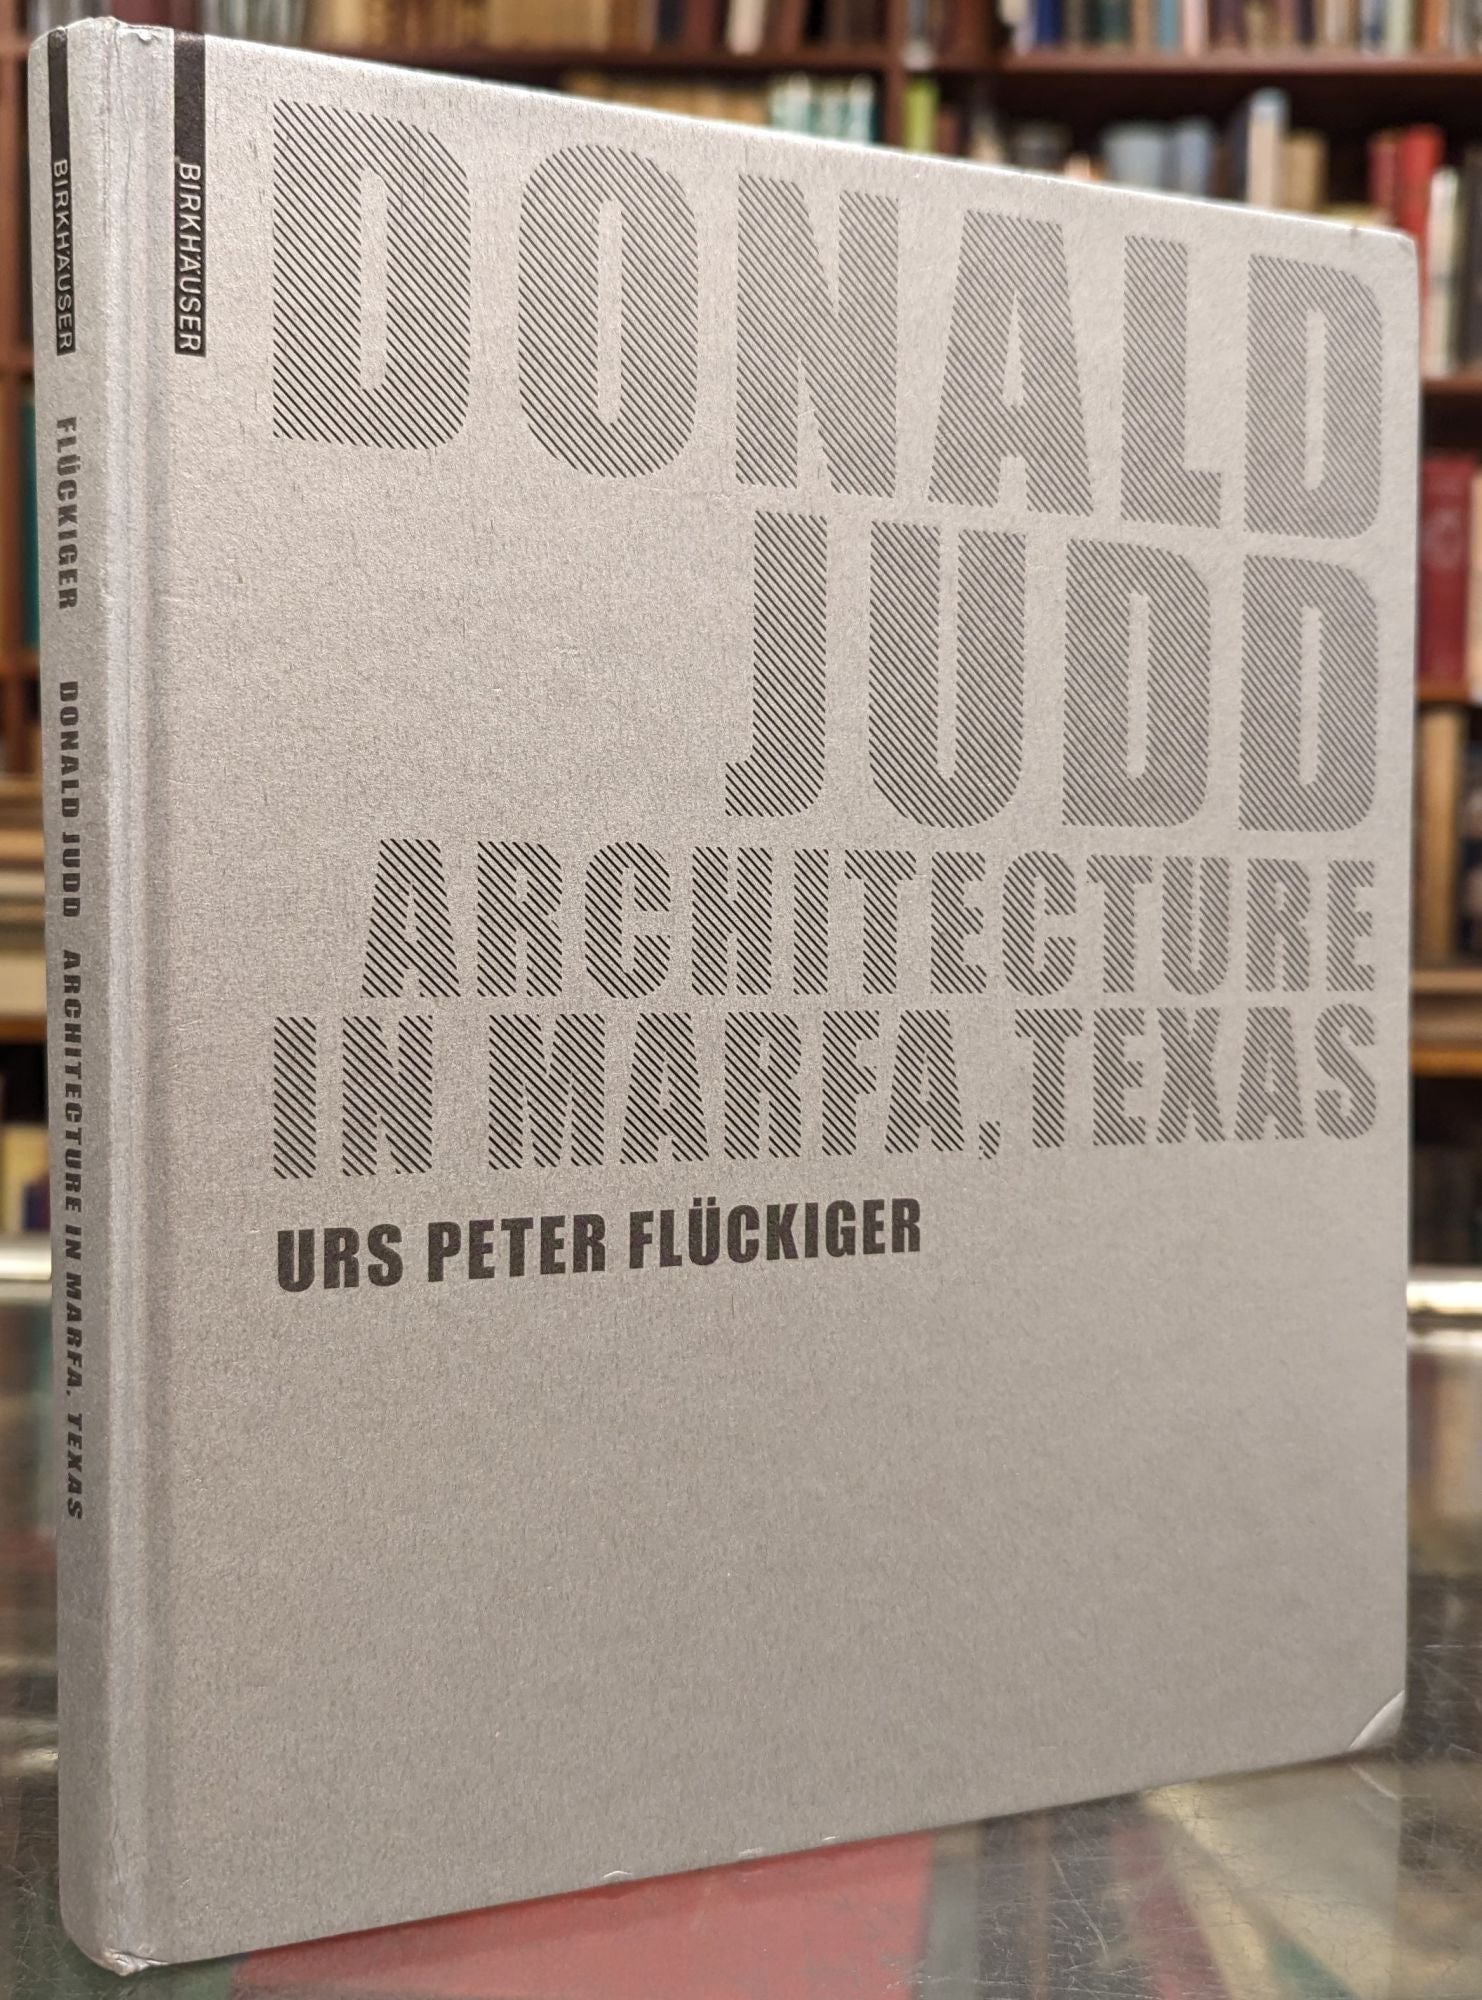 Donald Judd: Architecture in Marfa, Texas by Urs Peter Fluckiger on Moe's  Books